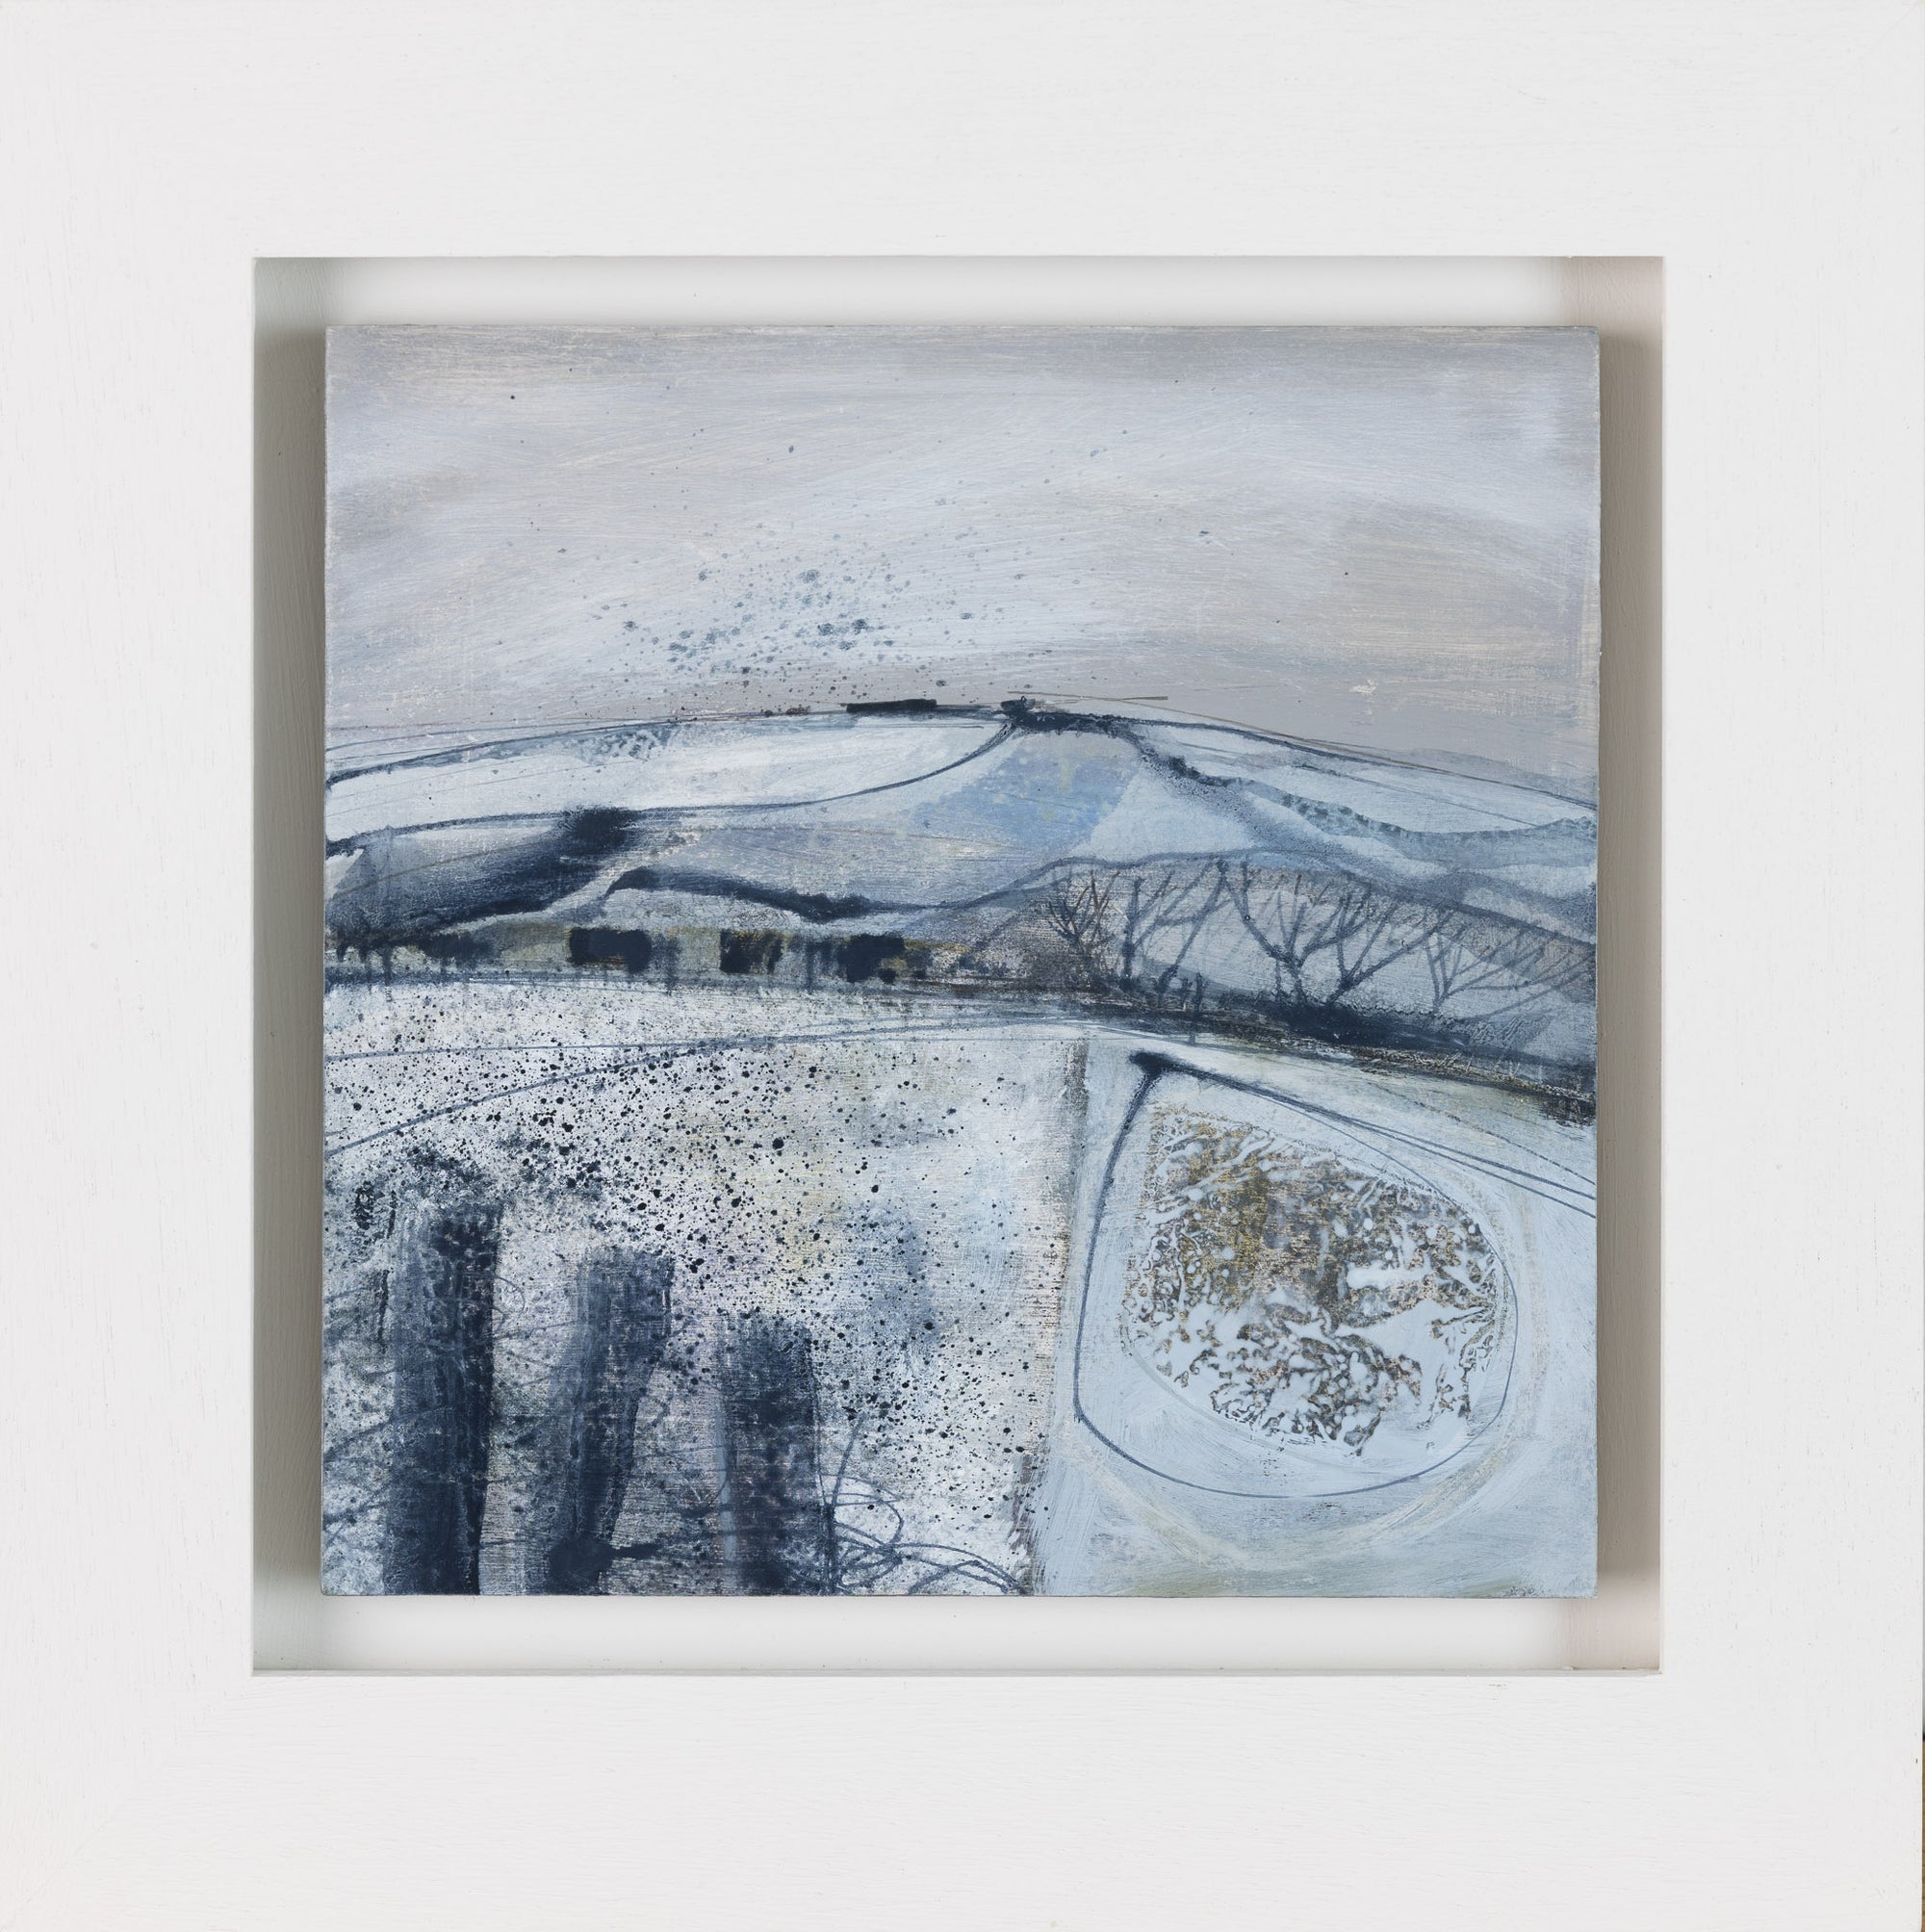 'Snowmelt', by Ruth Taylor, available from Padstow Gallery Cornwall